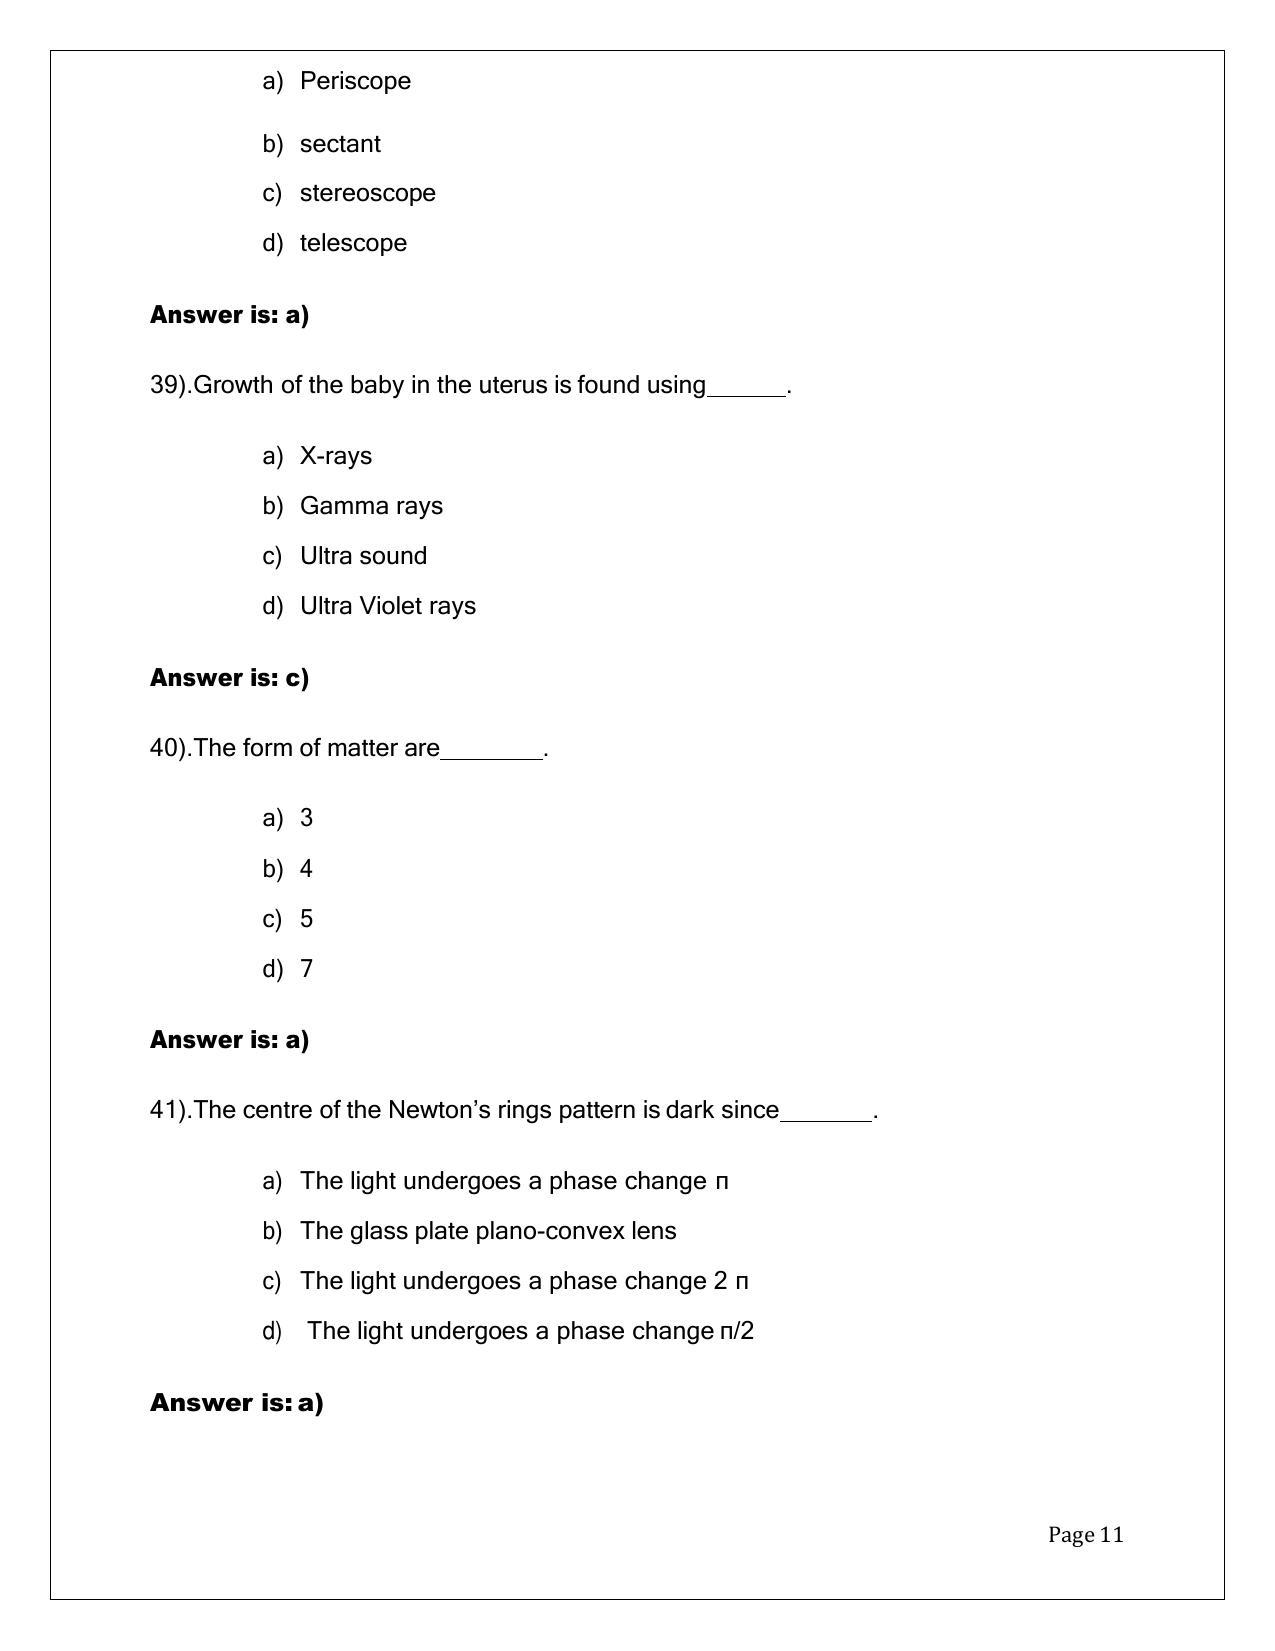 OUAT Physics Sample Paper - Page 11